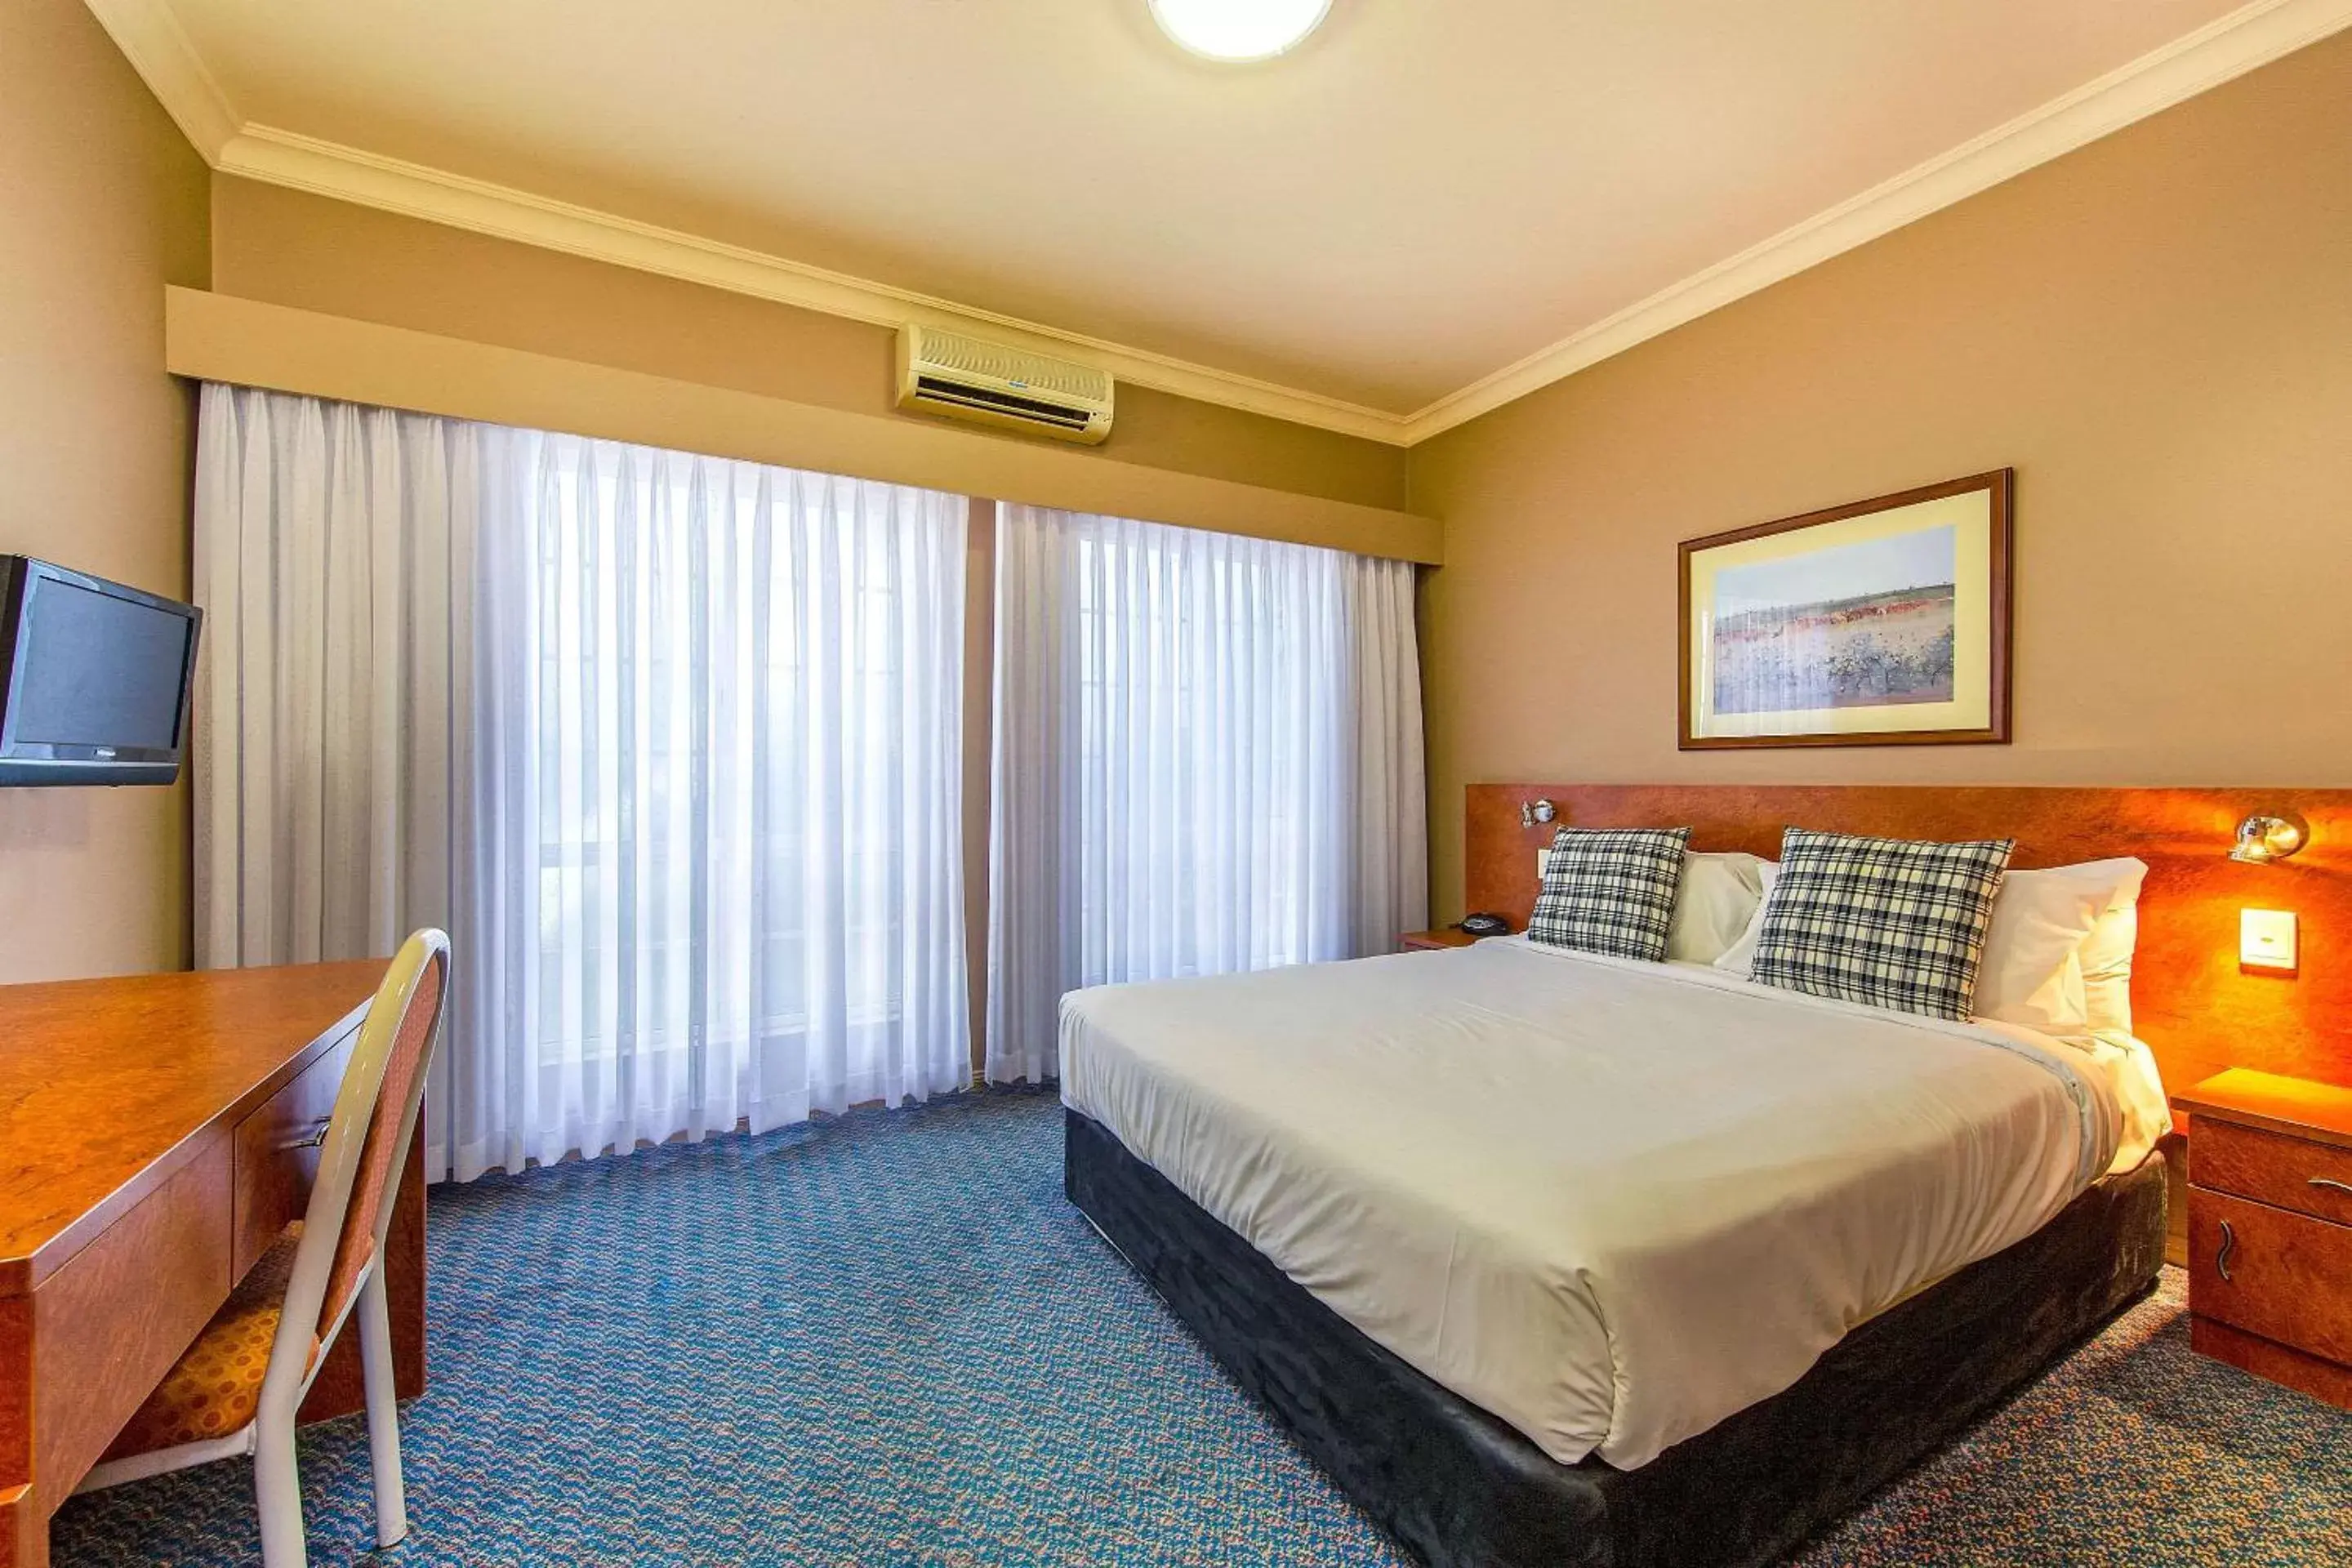 Bed in Quality Inn Penrith Sydney